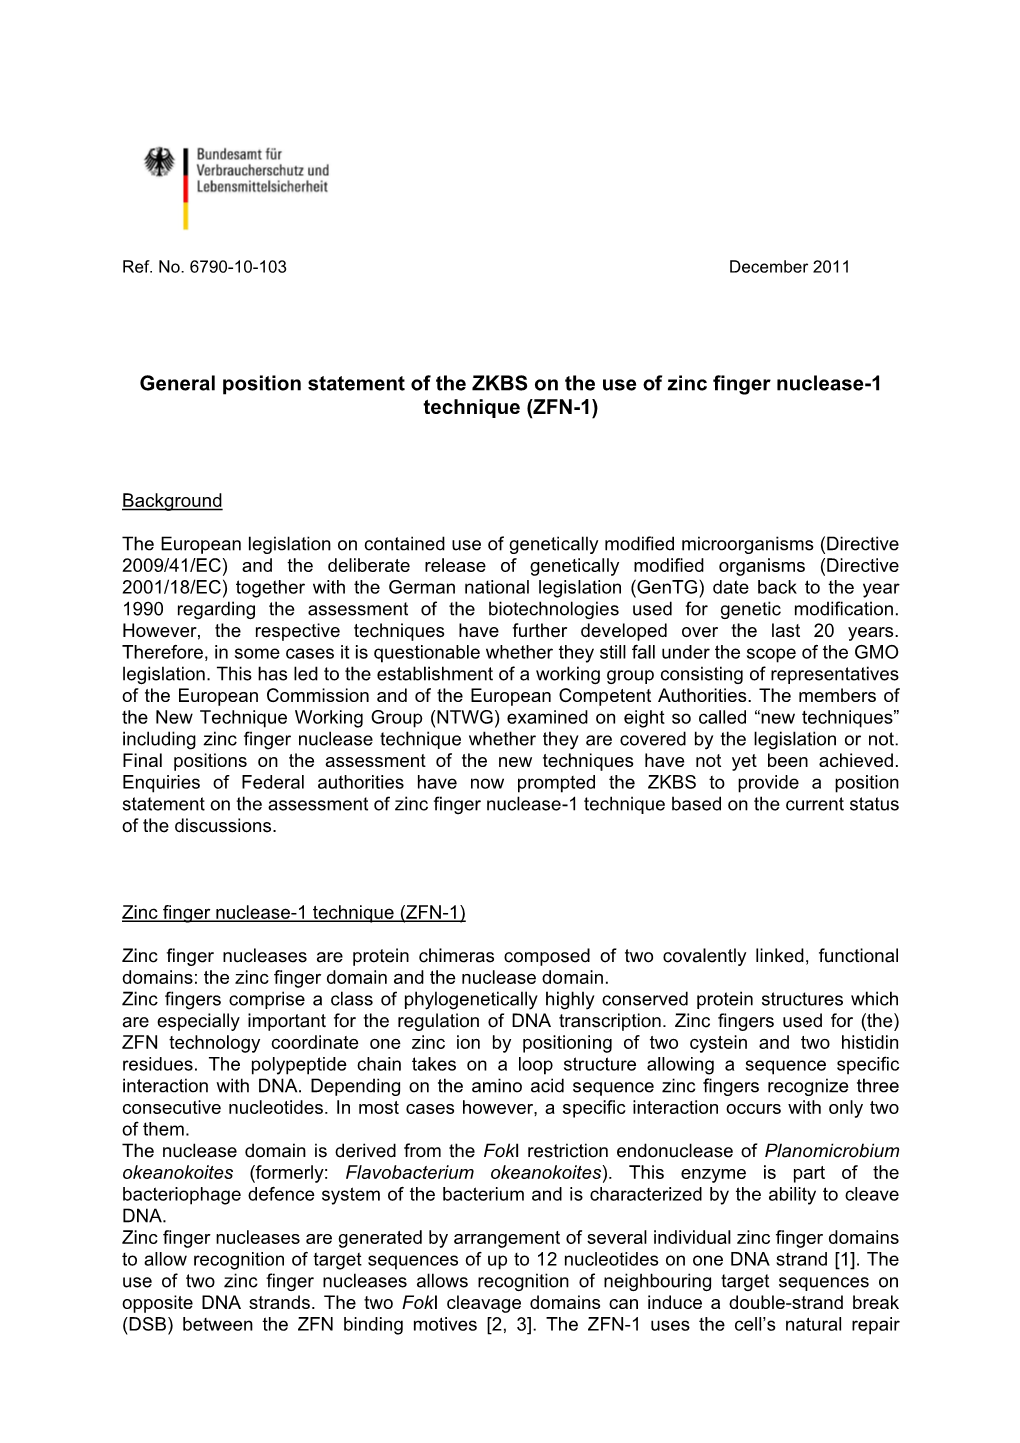 General Position Statement of the ZKBS on the Use of Zinc Finger Nuclease-1 Technique (ZFN-1)